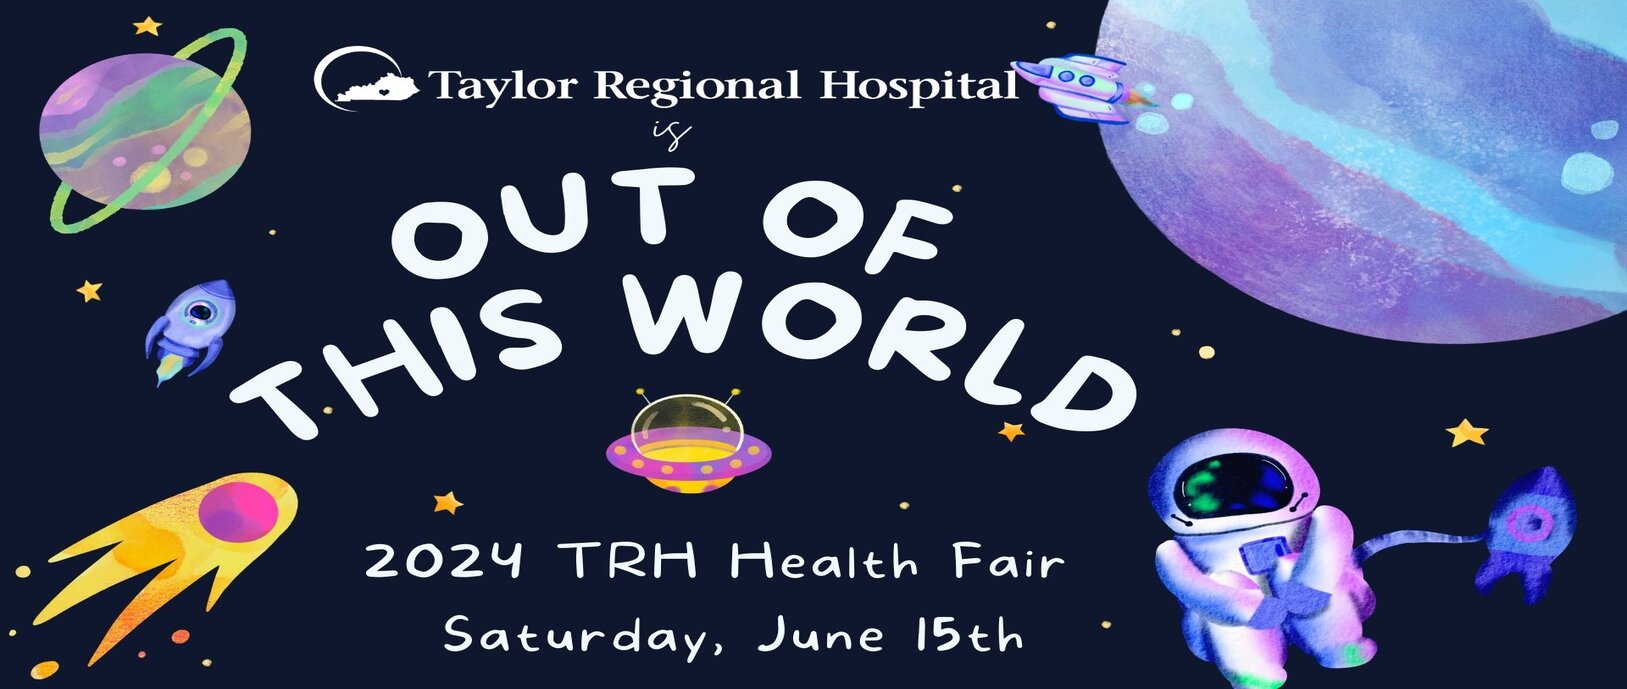 Taylor Regional is out of this world
2024 TRH Health Fair
Saturday,June 15th